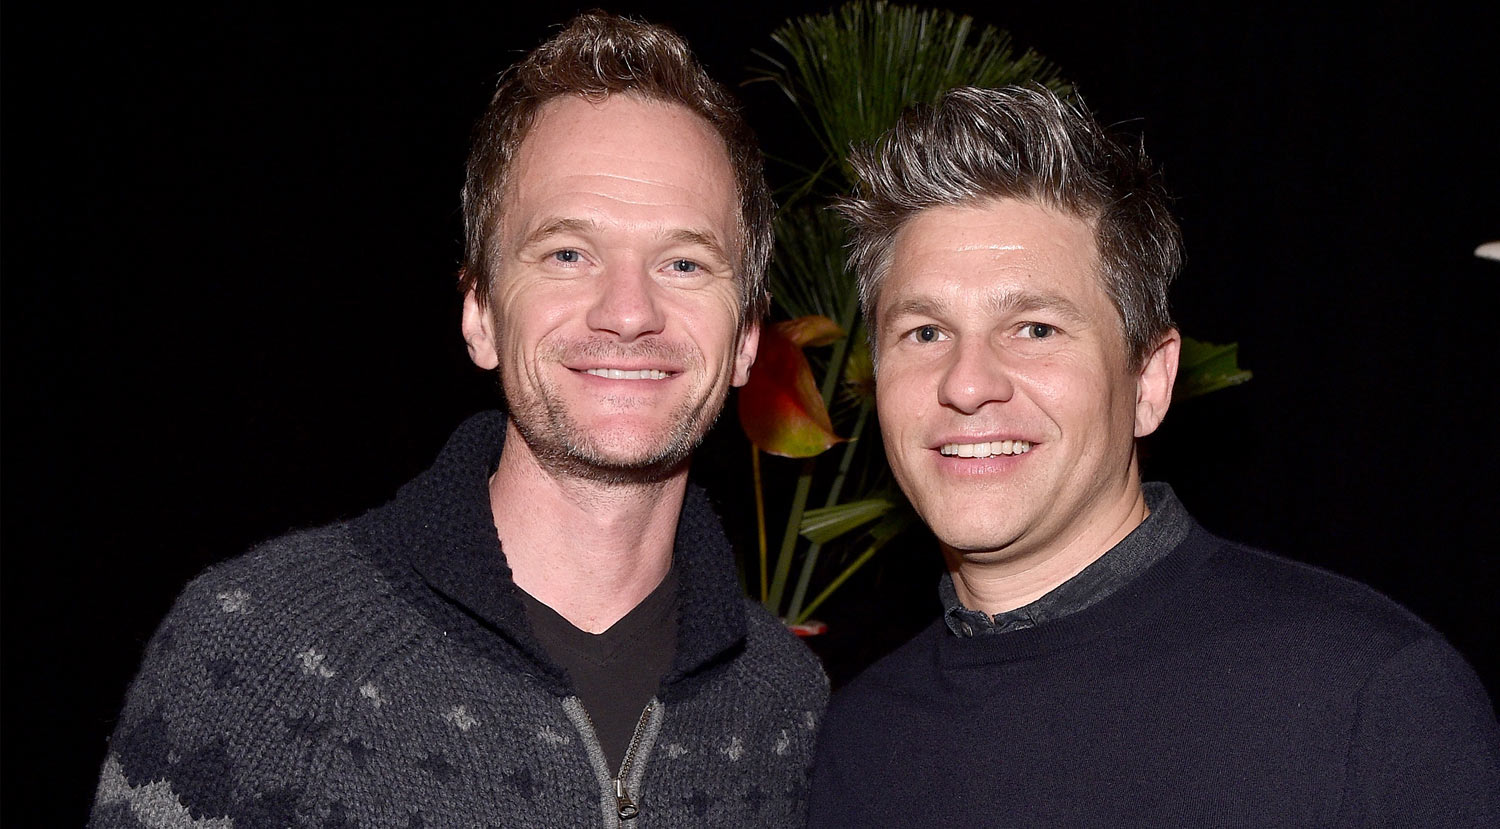 Neil Patrick Harris Got His First Tattoo in Honor of 'A Series of Unfortunate Events'! - Just Jared